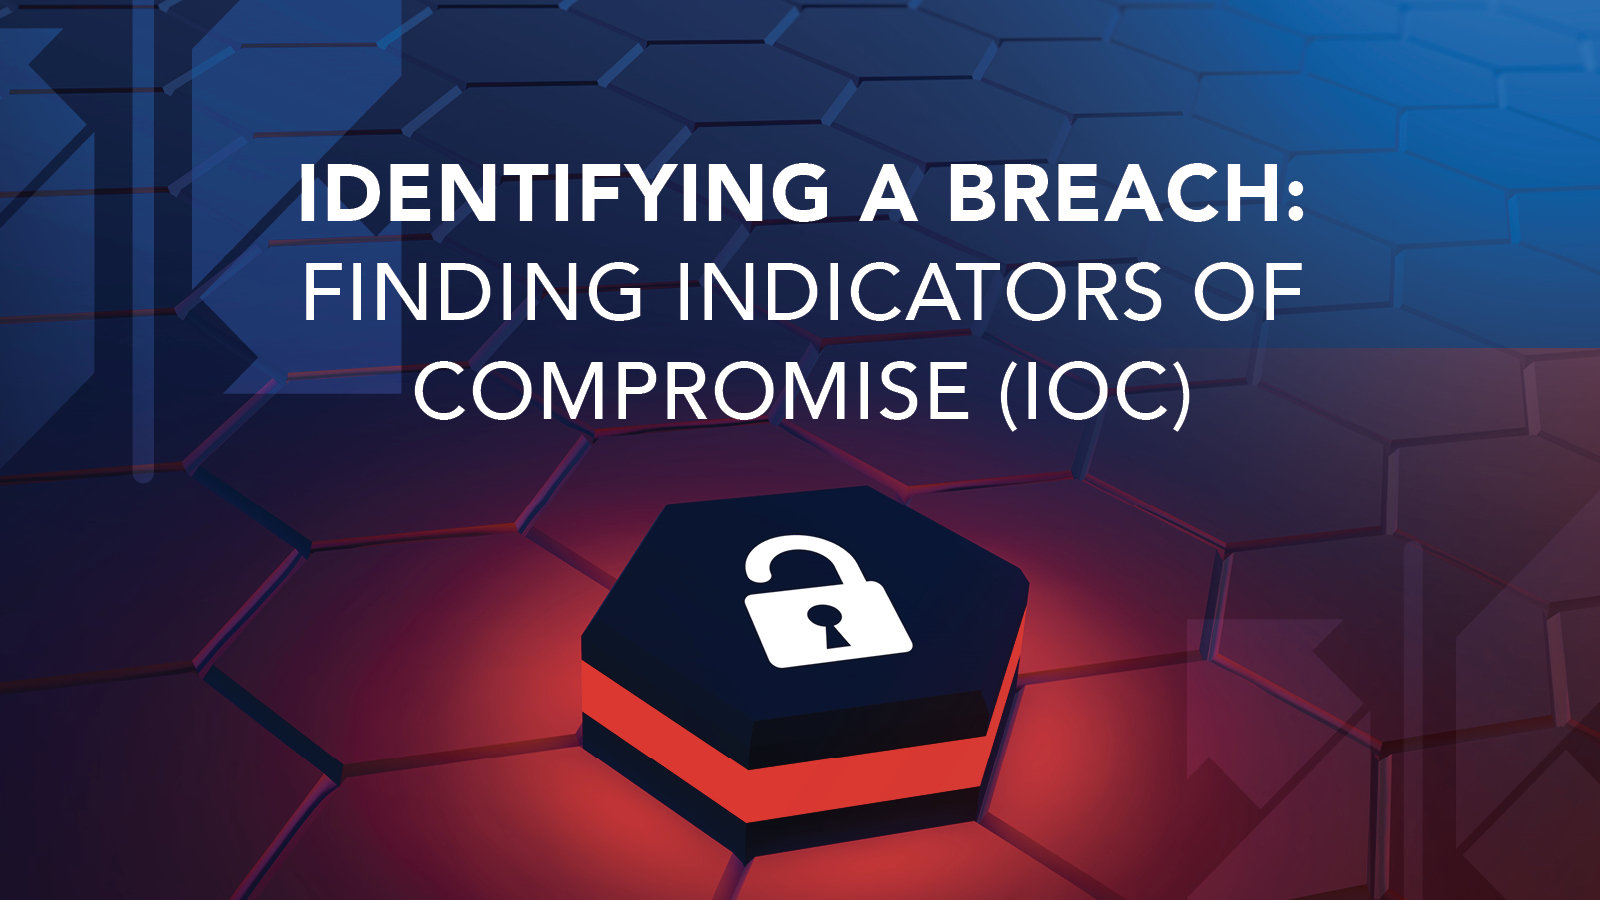 Identifying a Breach: Finding Indicators of Compromise (IOC)